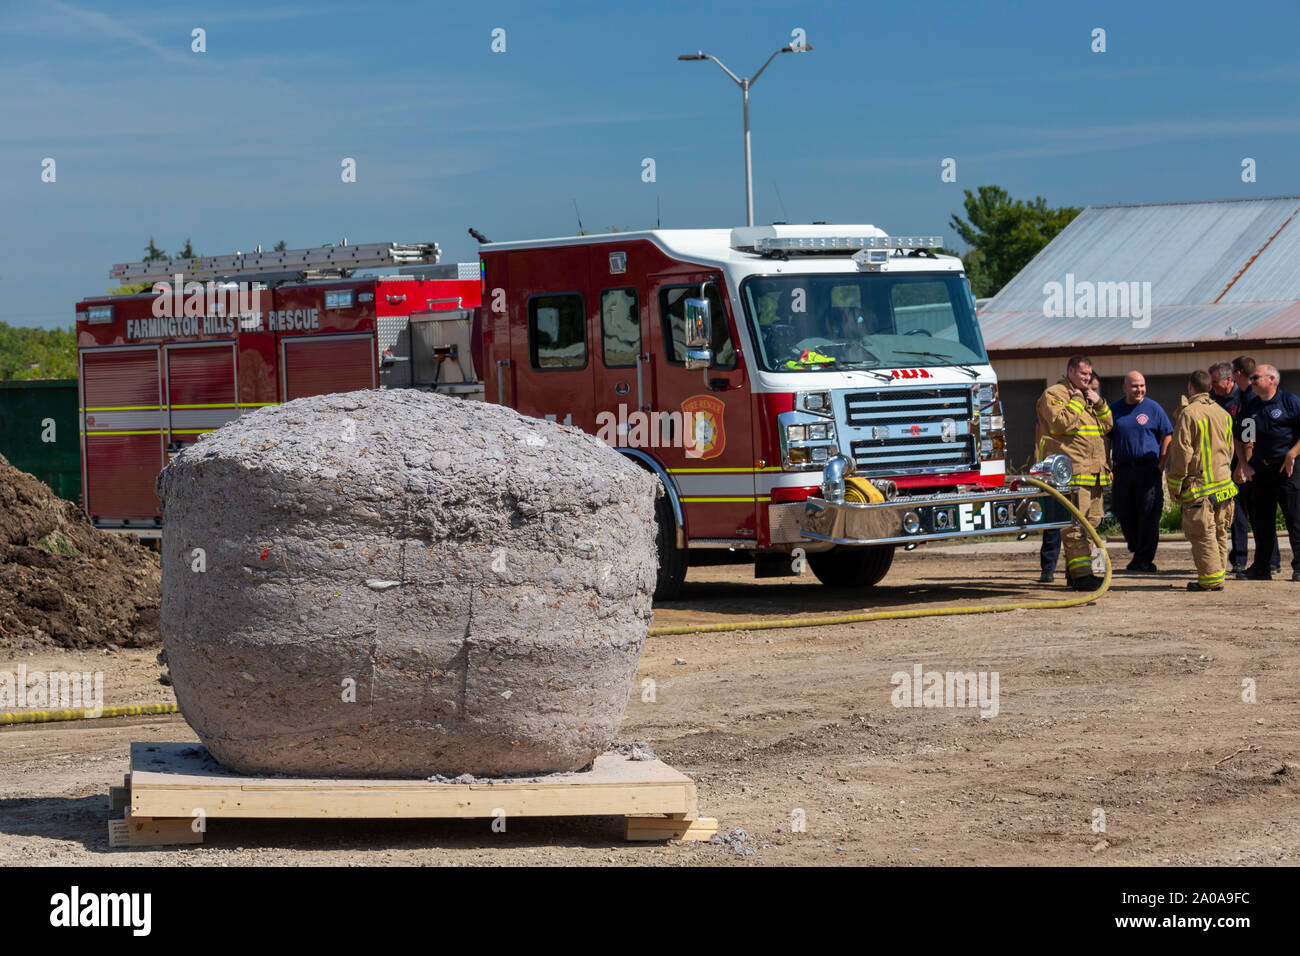 Farmington Hills, Michigan, USA. 19th Sep, 2019. A giant ball of dryer lint weighing 690 pounds set a Guinness World Record as the world's largest ball of lint. After it was weighed, firefighters burned the lint as a warning about the danger of dryer fires due to uncleaned vents. The U.S. government says about 2,900 home dryer fires occur every year. A vent cleaning company, Dryer Vent Wizard, collected the lint from its franchisees. Credit: Jim West/Alamy Live News Stock Photo